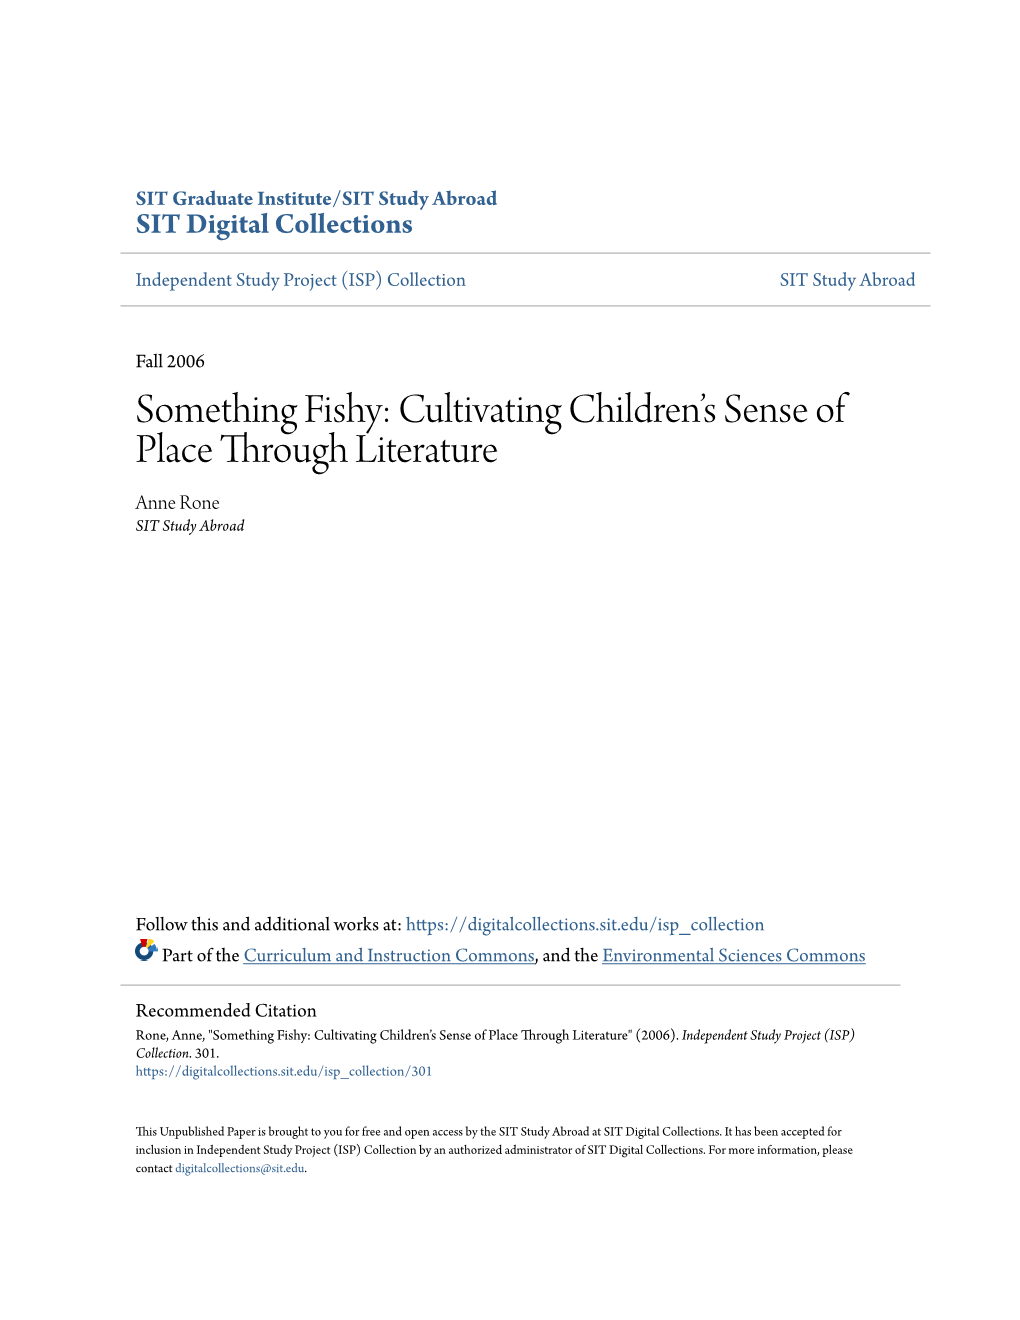 Something Fishy: Cultivating Children’S Sense of Place Through Literature Anne Rone SIT Study Abroad